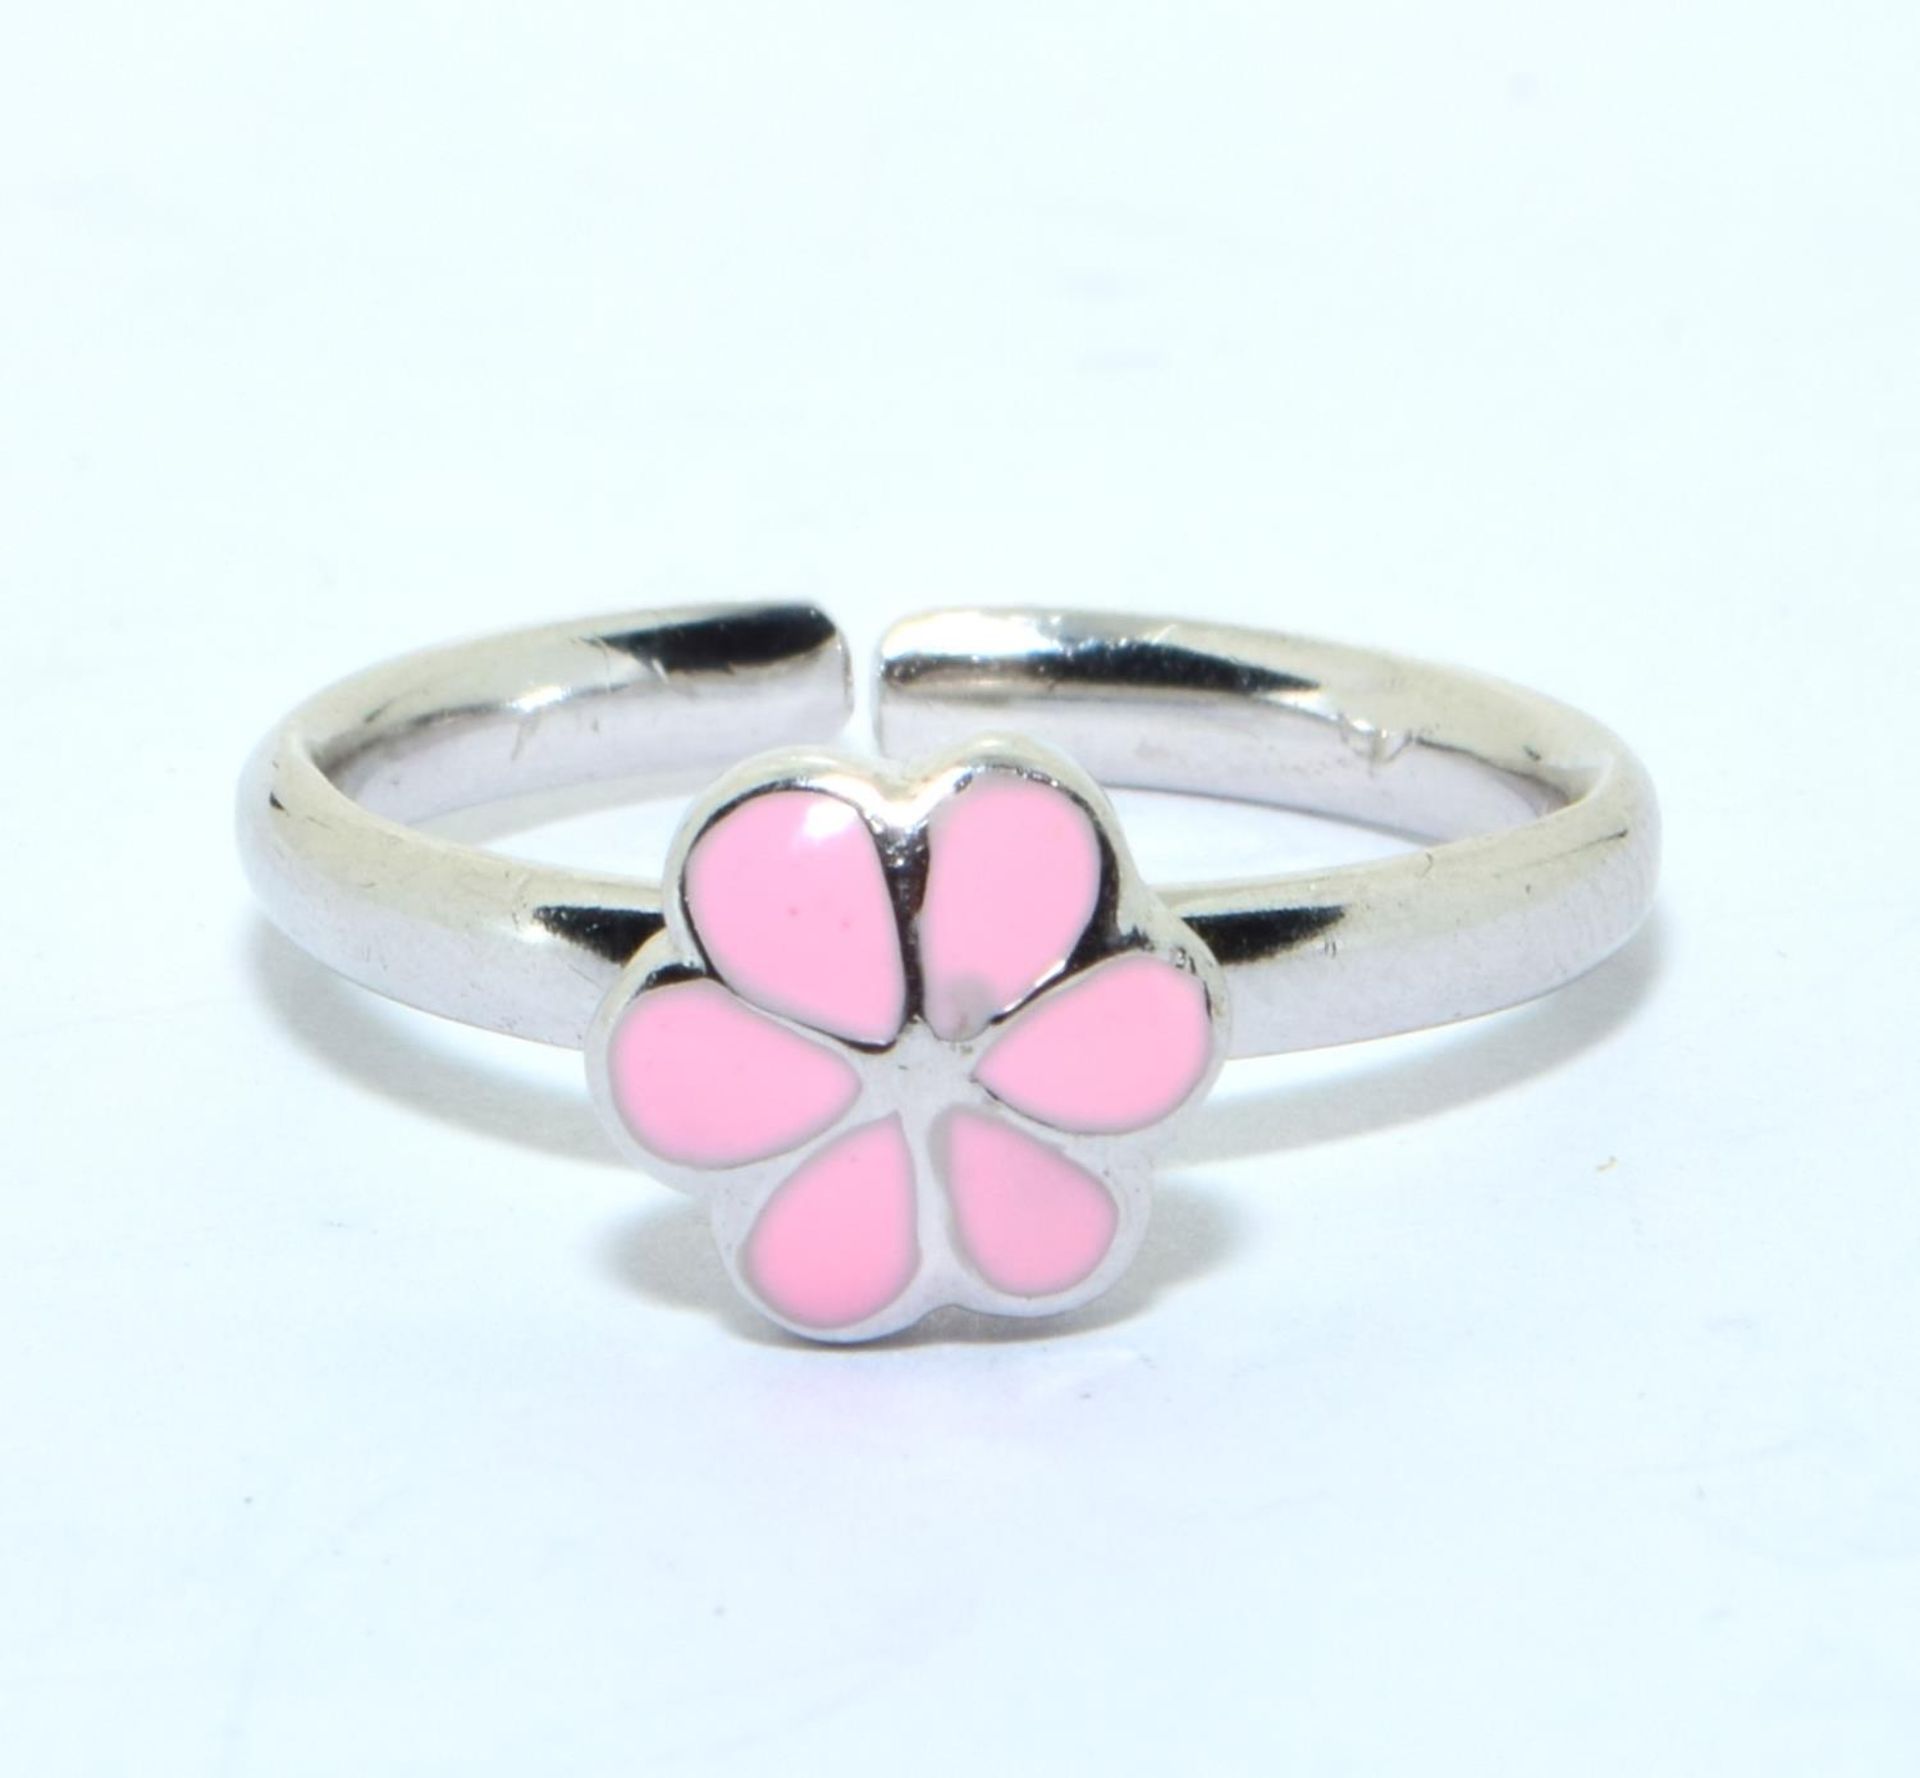 A 925 silver pink flower ring, adjustable size.